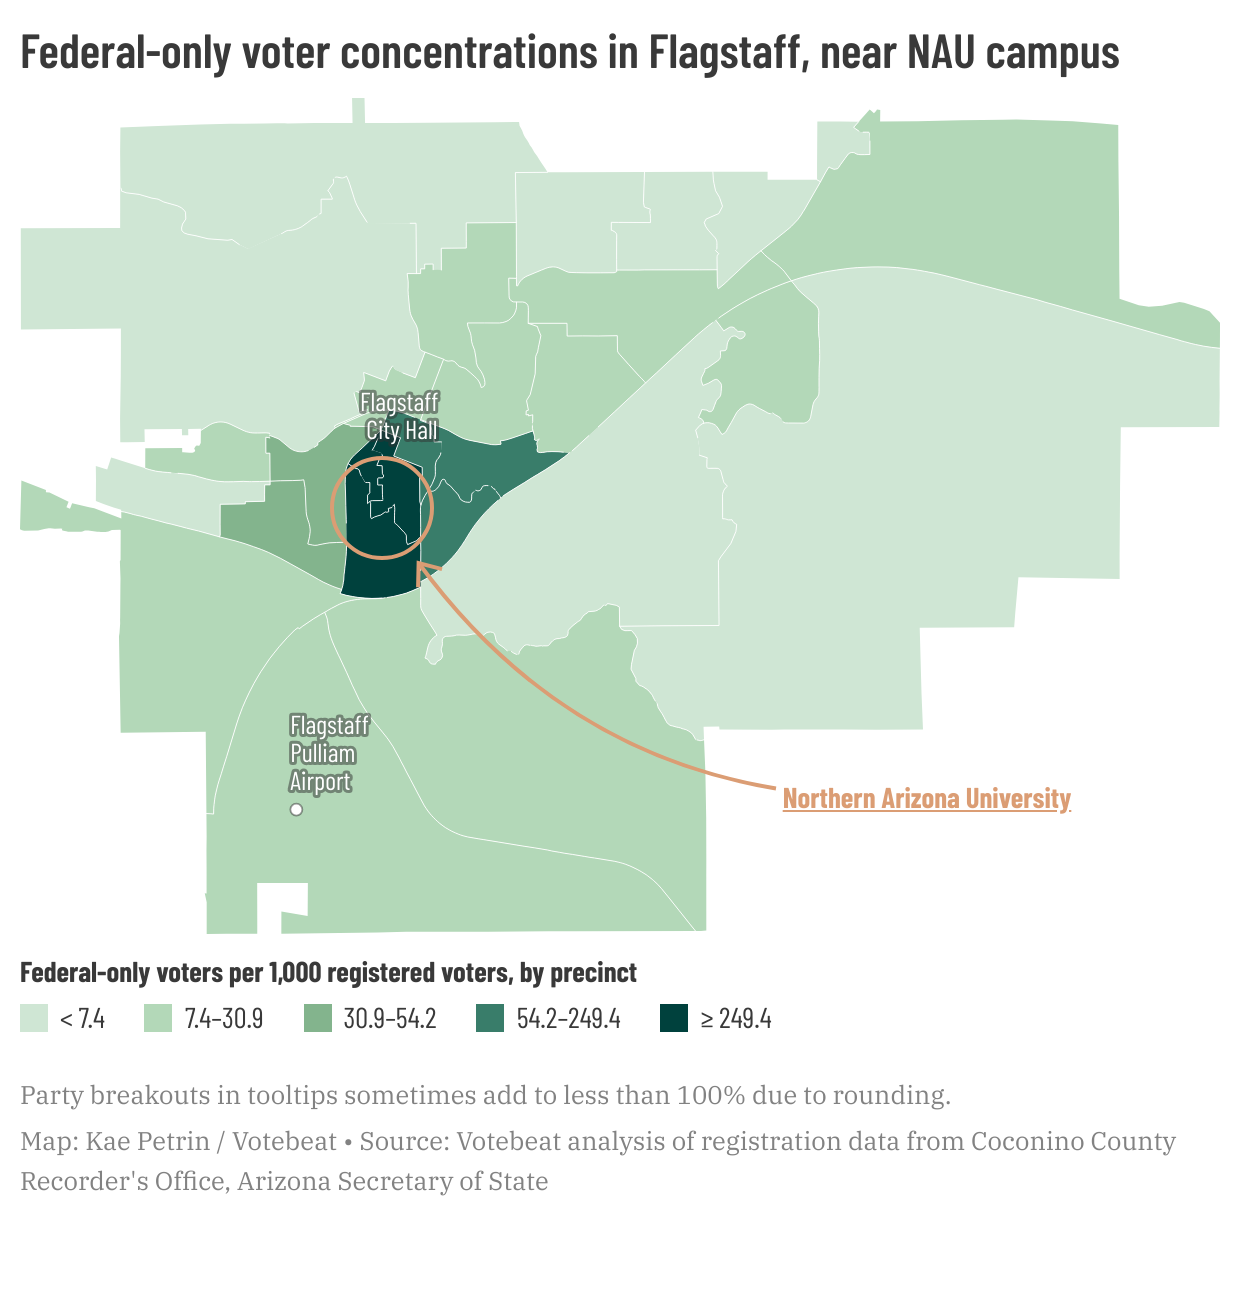 map showing federal-only voter concentrations in Flagstaff, near NAU campus